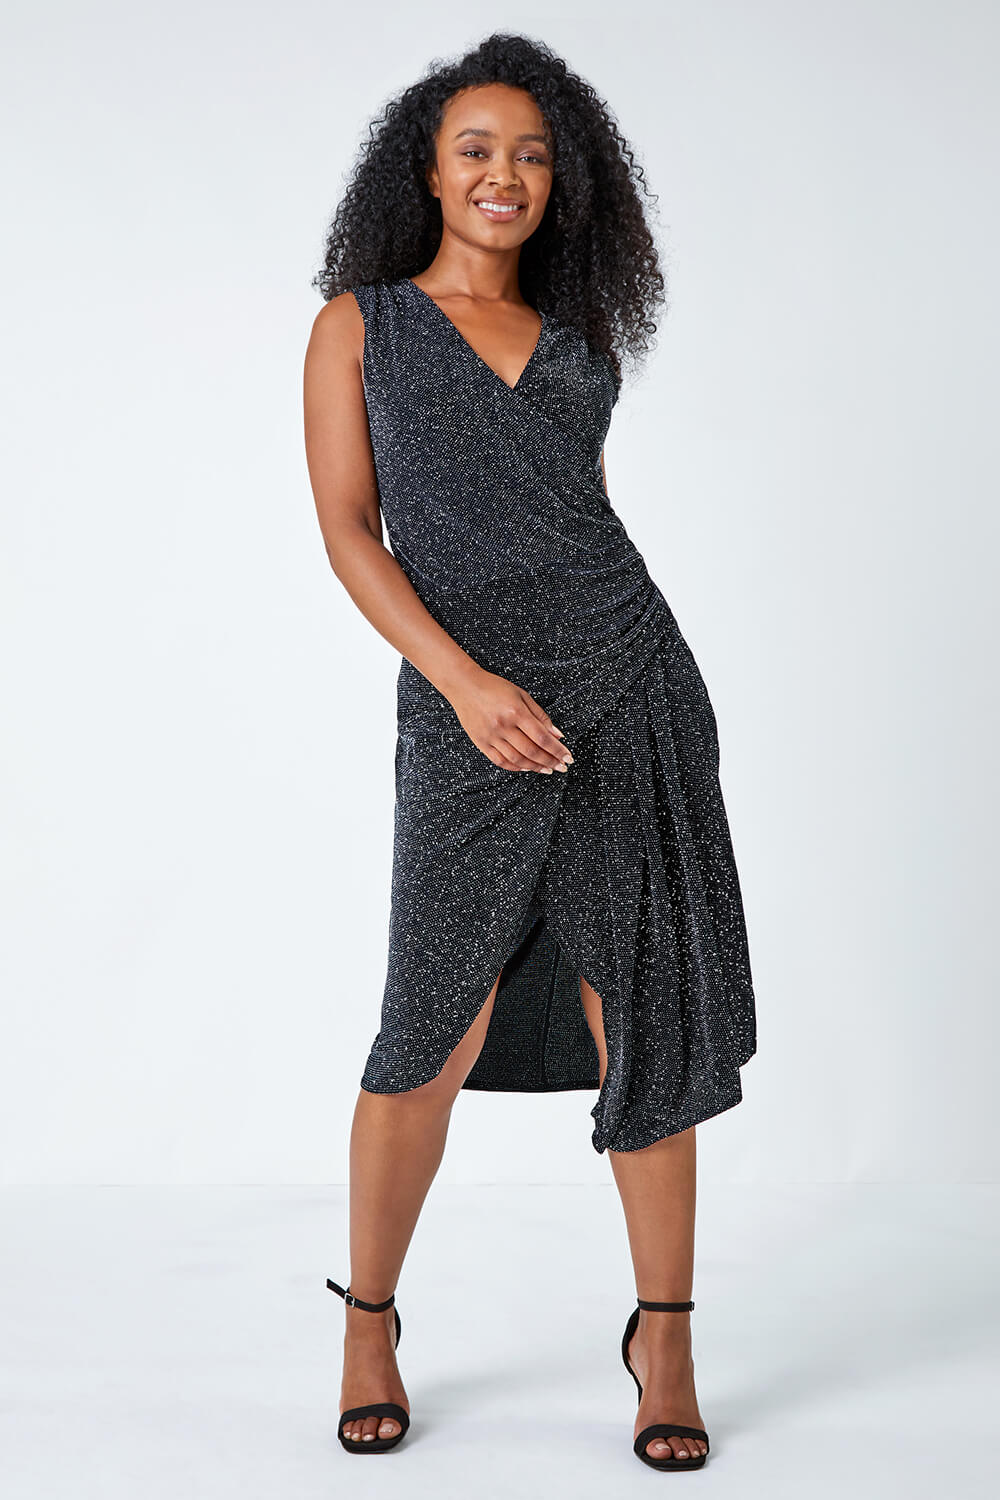 Silver Petite Ruched Wrap Stretch Dress, Image 2 of 5